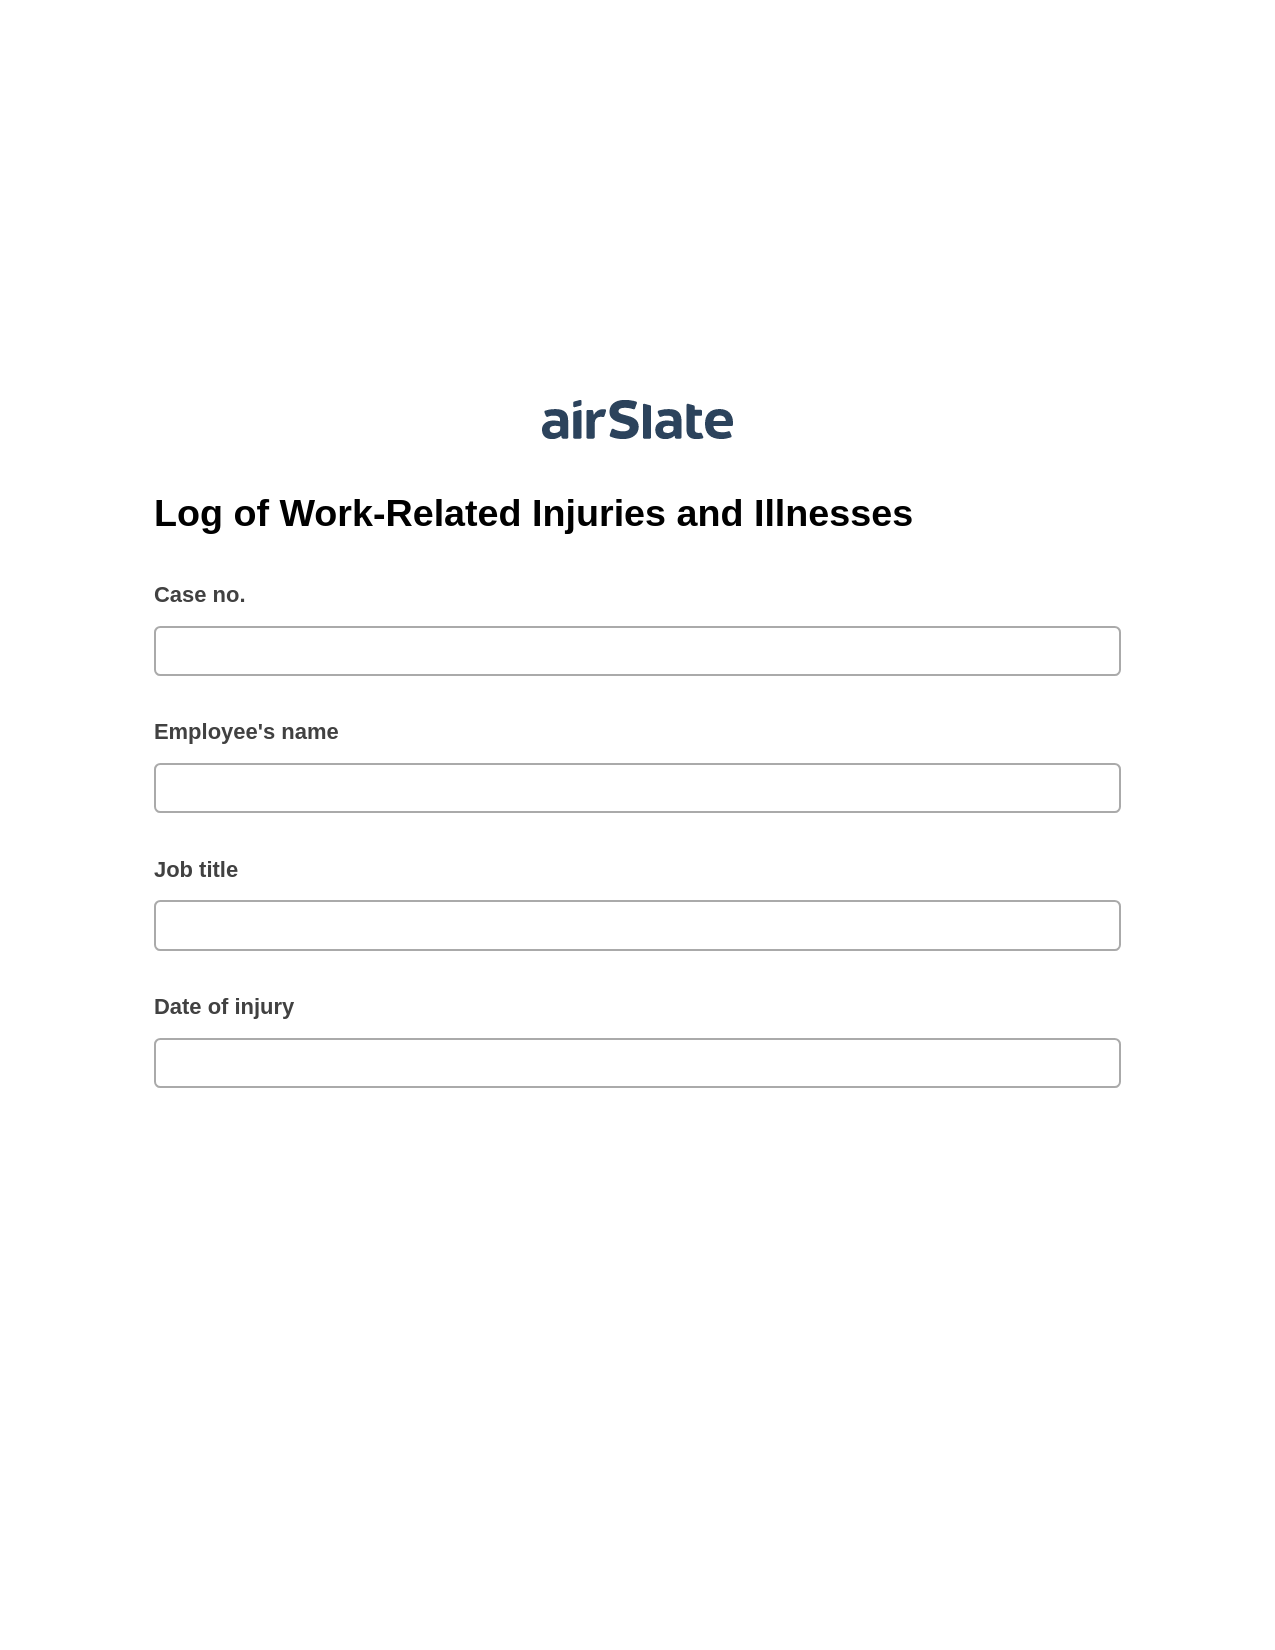 Multirole Log of Work-Related Injuries and Illnesses Pre-fill from MySQL Dropdown Options Bot, Create Slate Reminder Bot, Archive to SharePoint Folder Bot